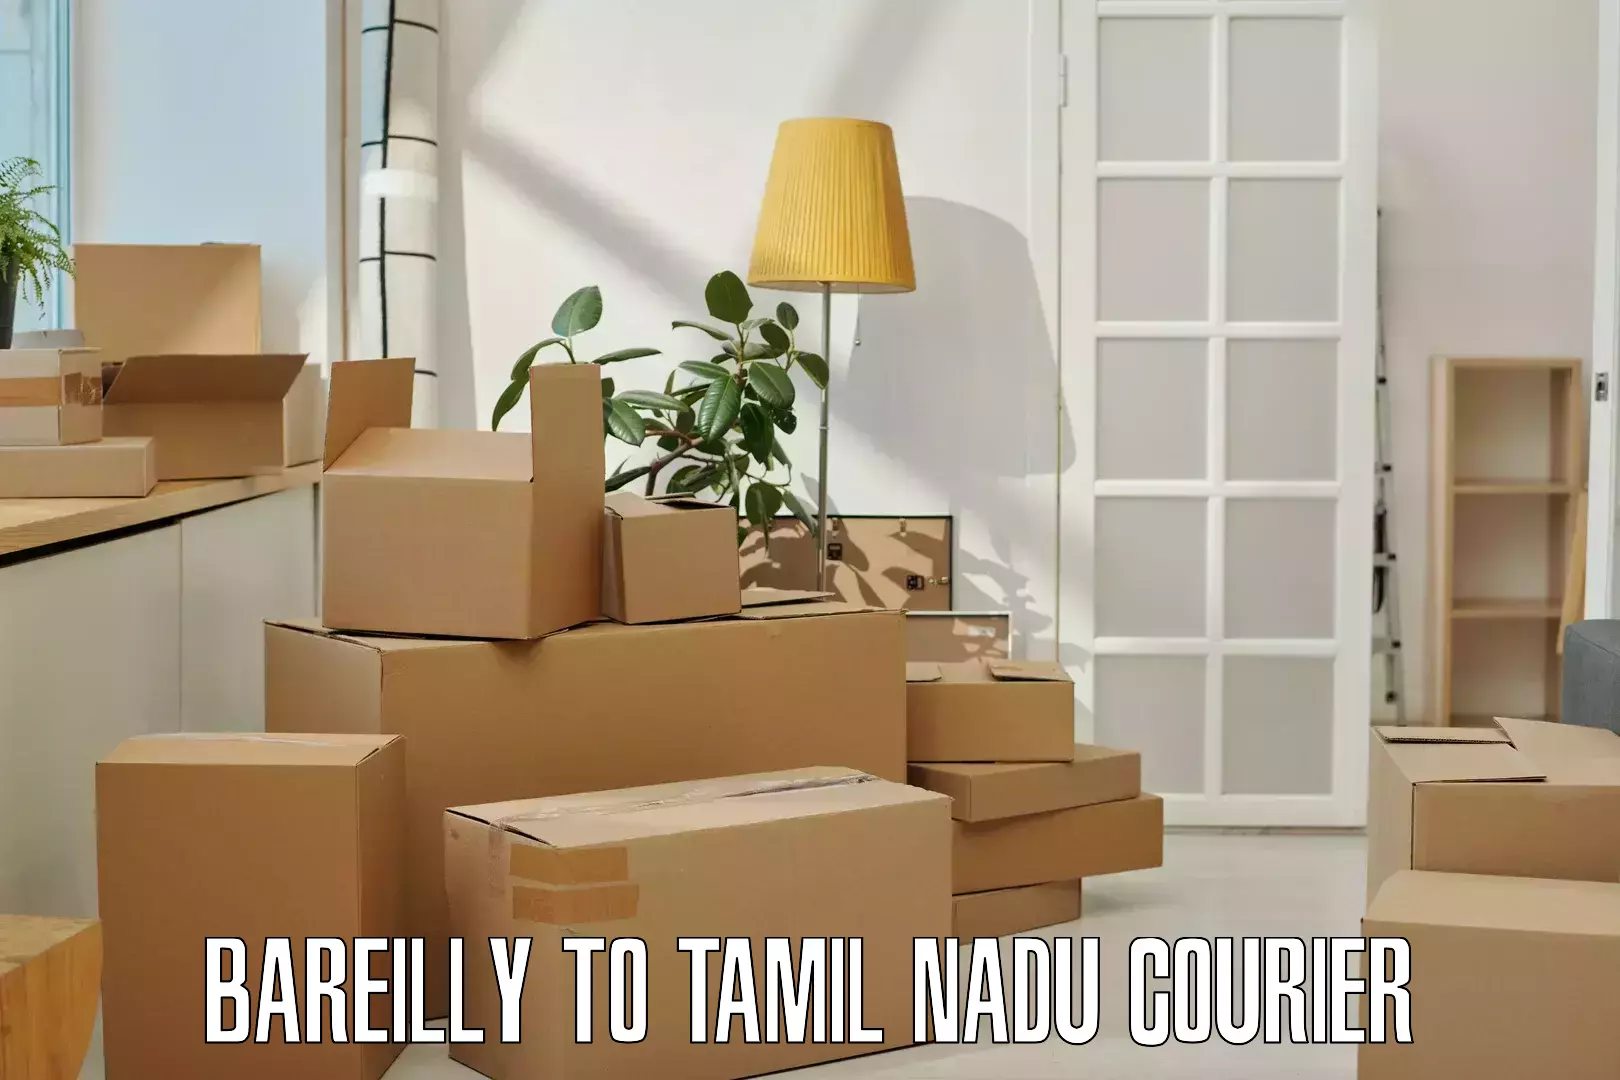 Premium delivery services Bareilly to Tamil Nadu